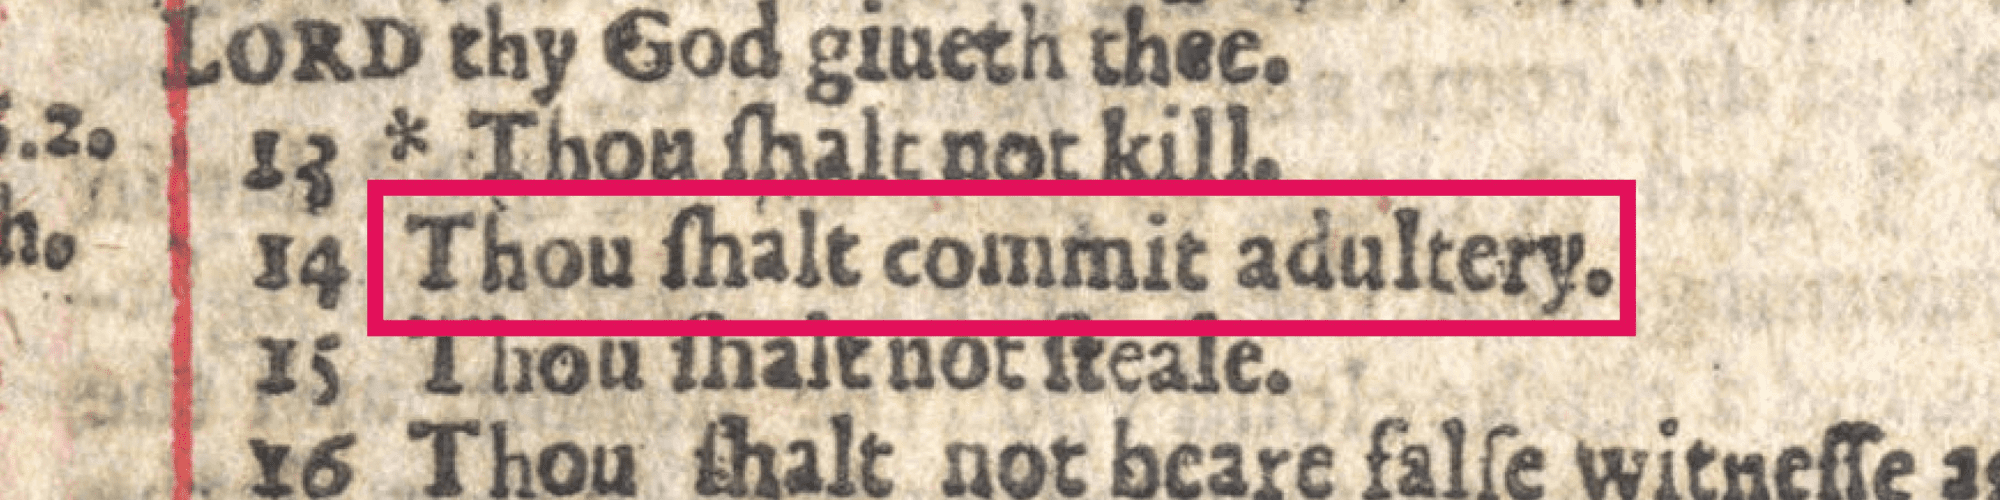 the wicked bible typo from history's greatest typos